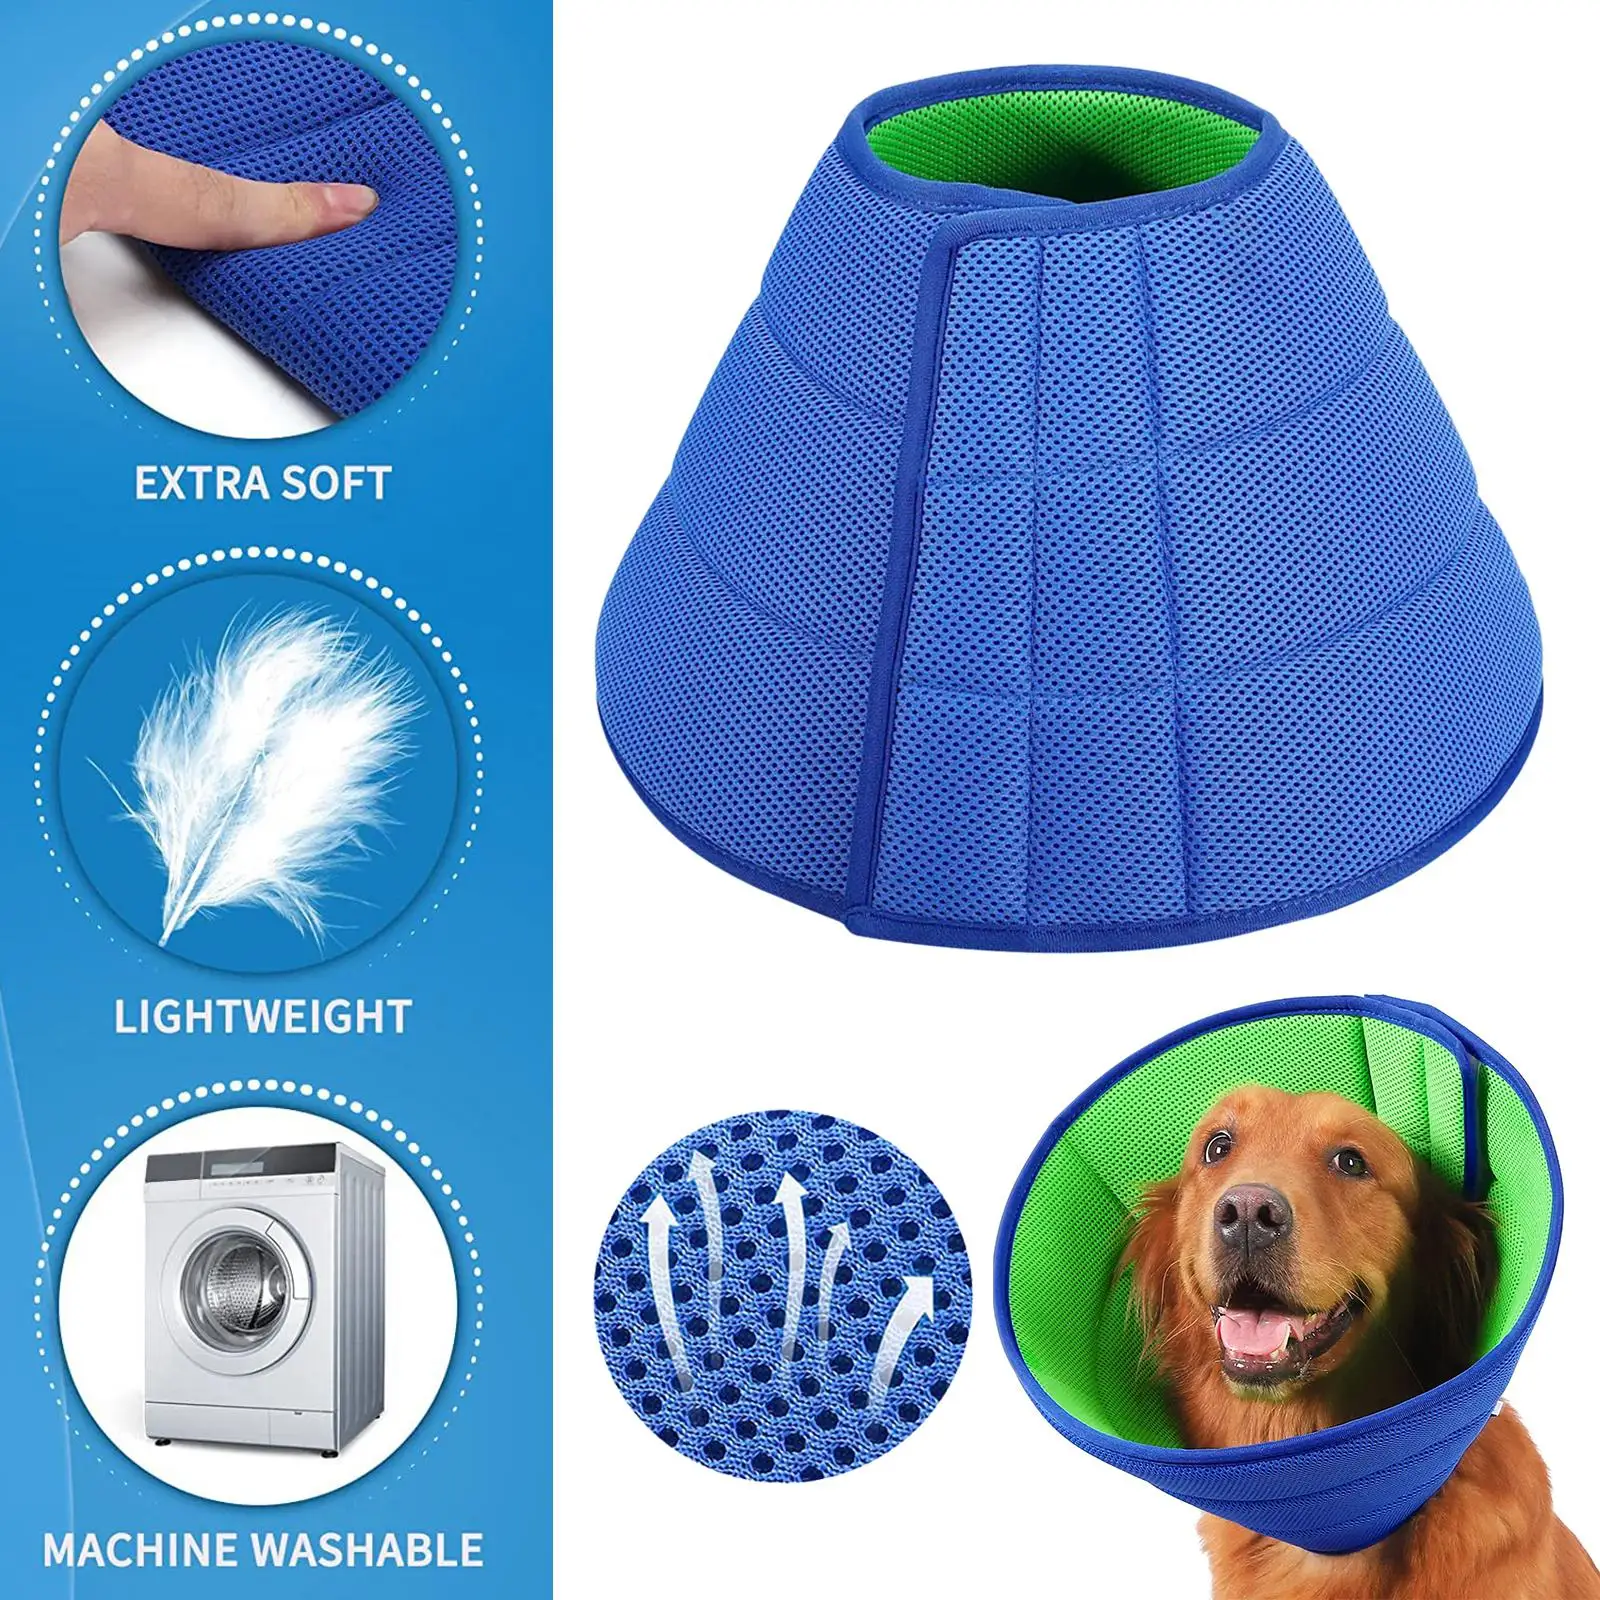 Dog Cone Collar Pets Adjustable After Surgery Comfortable Protective Wound Prevent Biting & Scratching Protective Soft for Cats